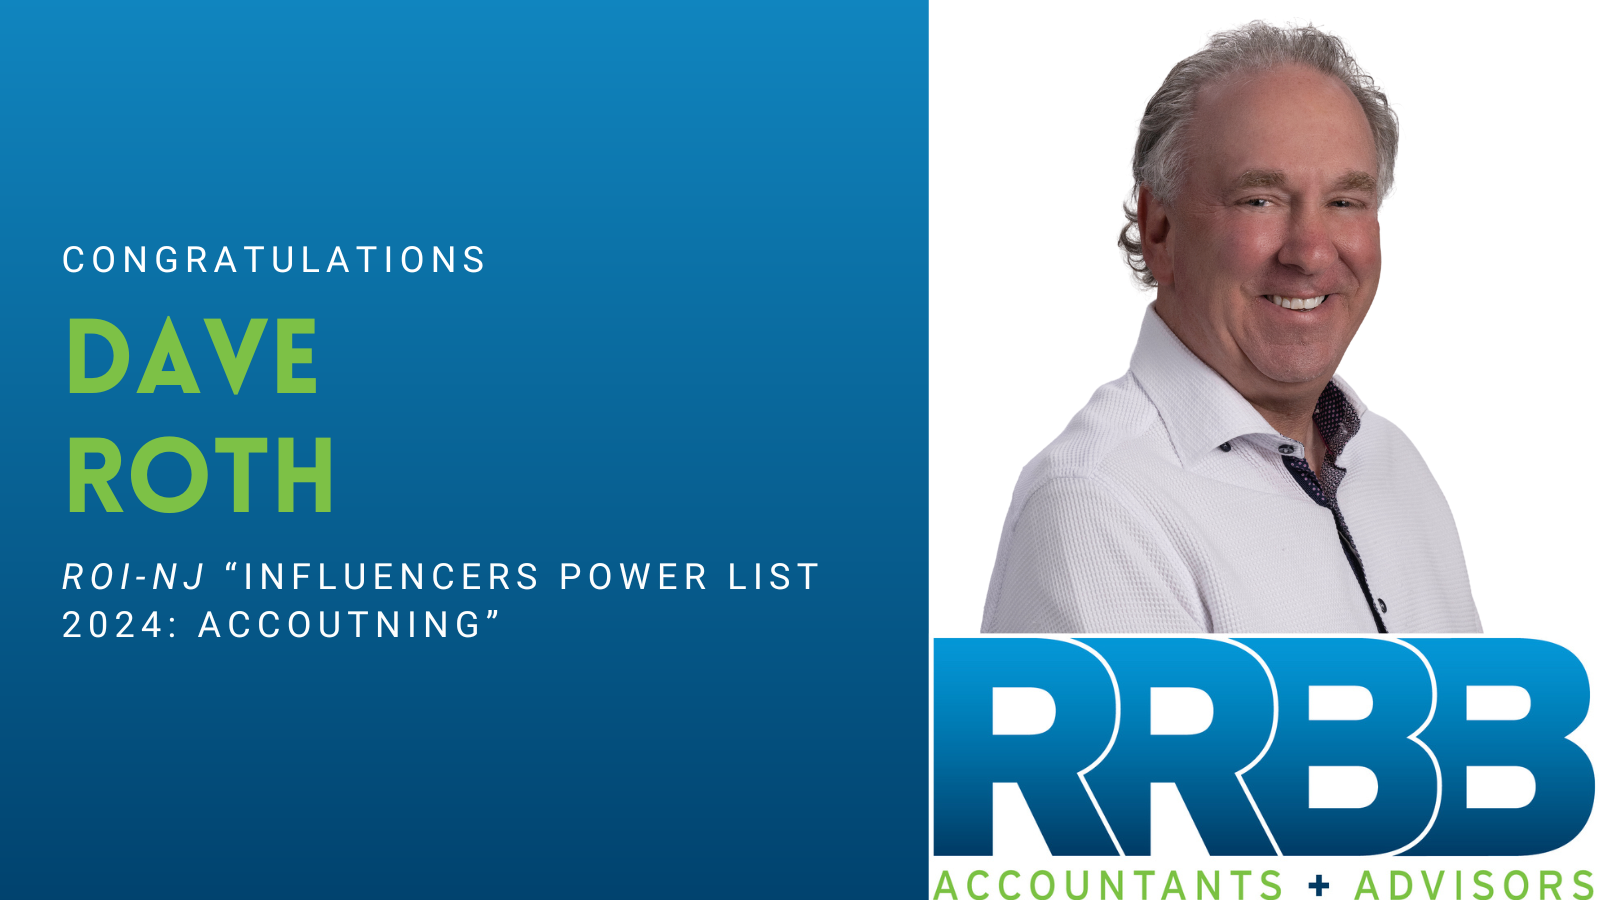 Dave Roth Listed in ROI-NJ’s “Influencers Power List 2024: Accounting”